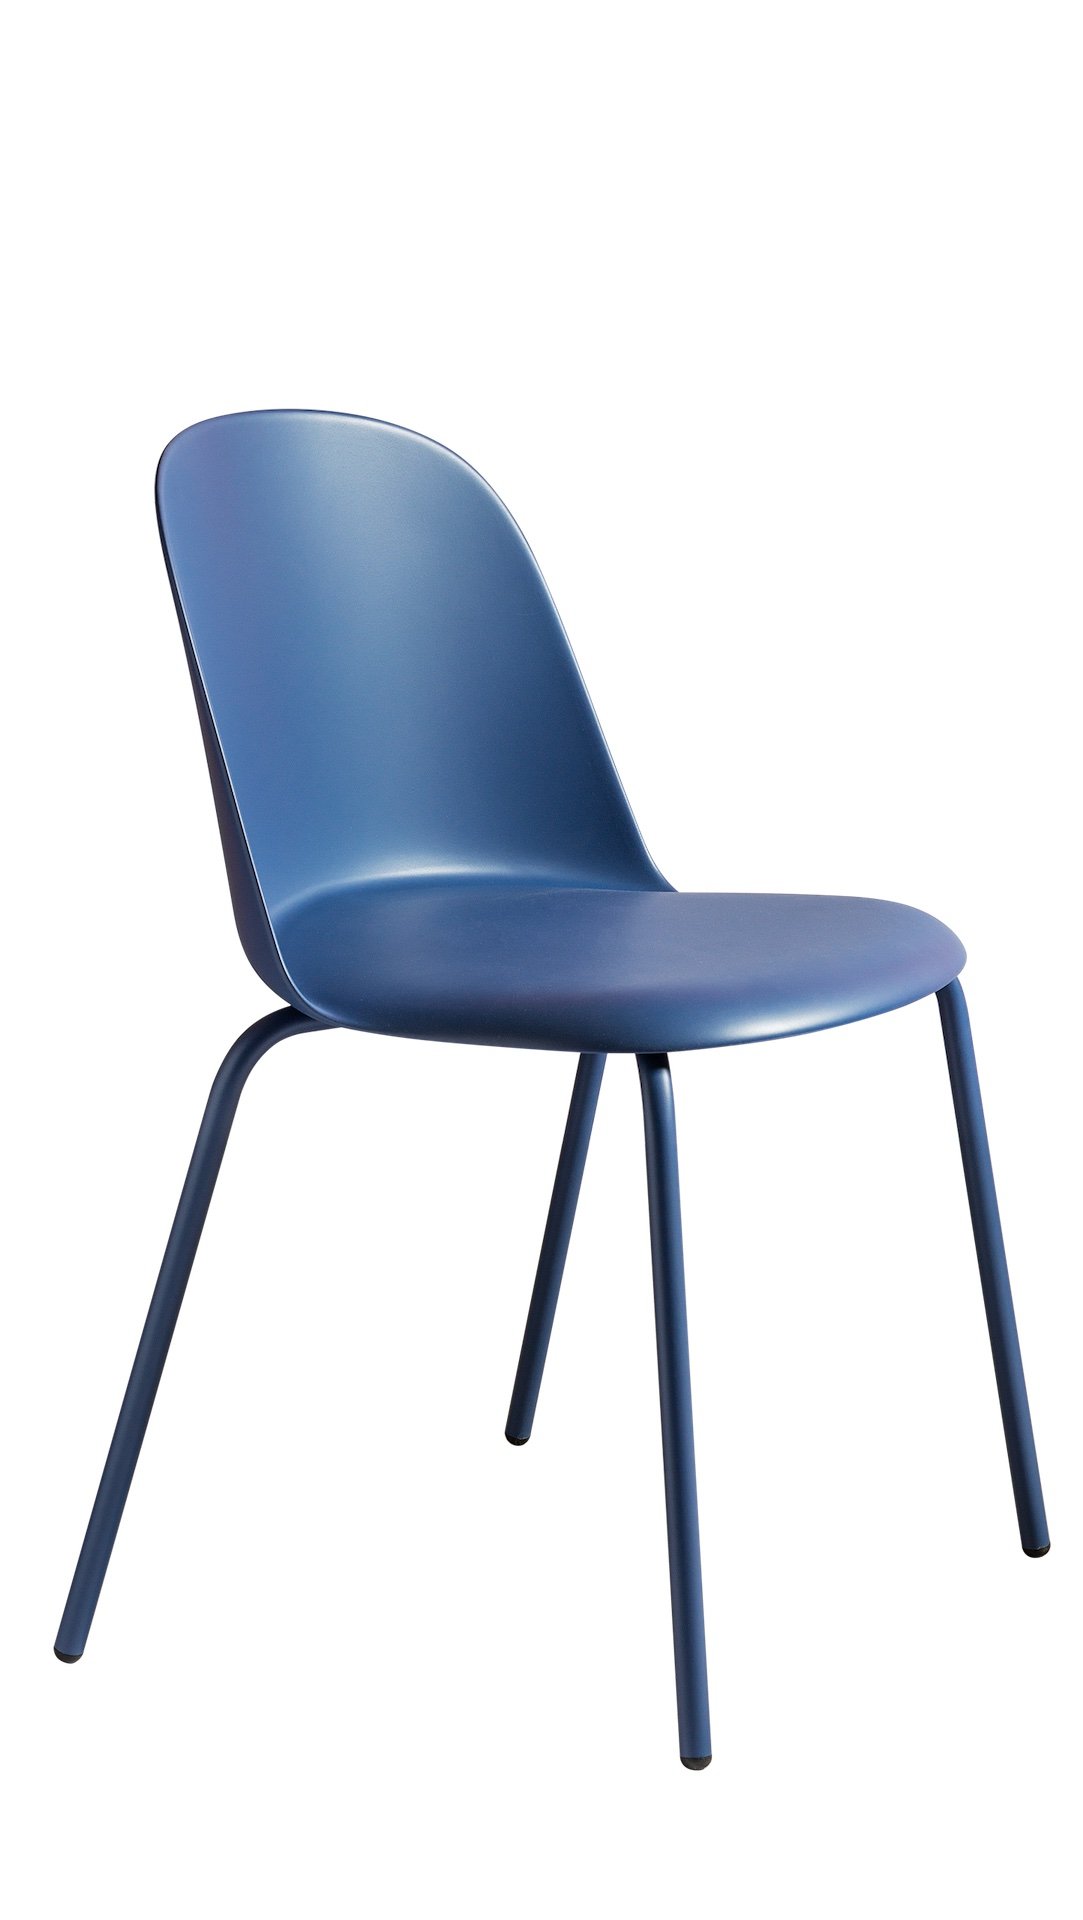 Mariolina Chair from Miniforms, designed by E-ggs